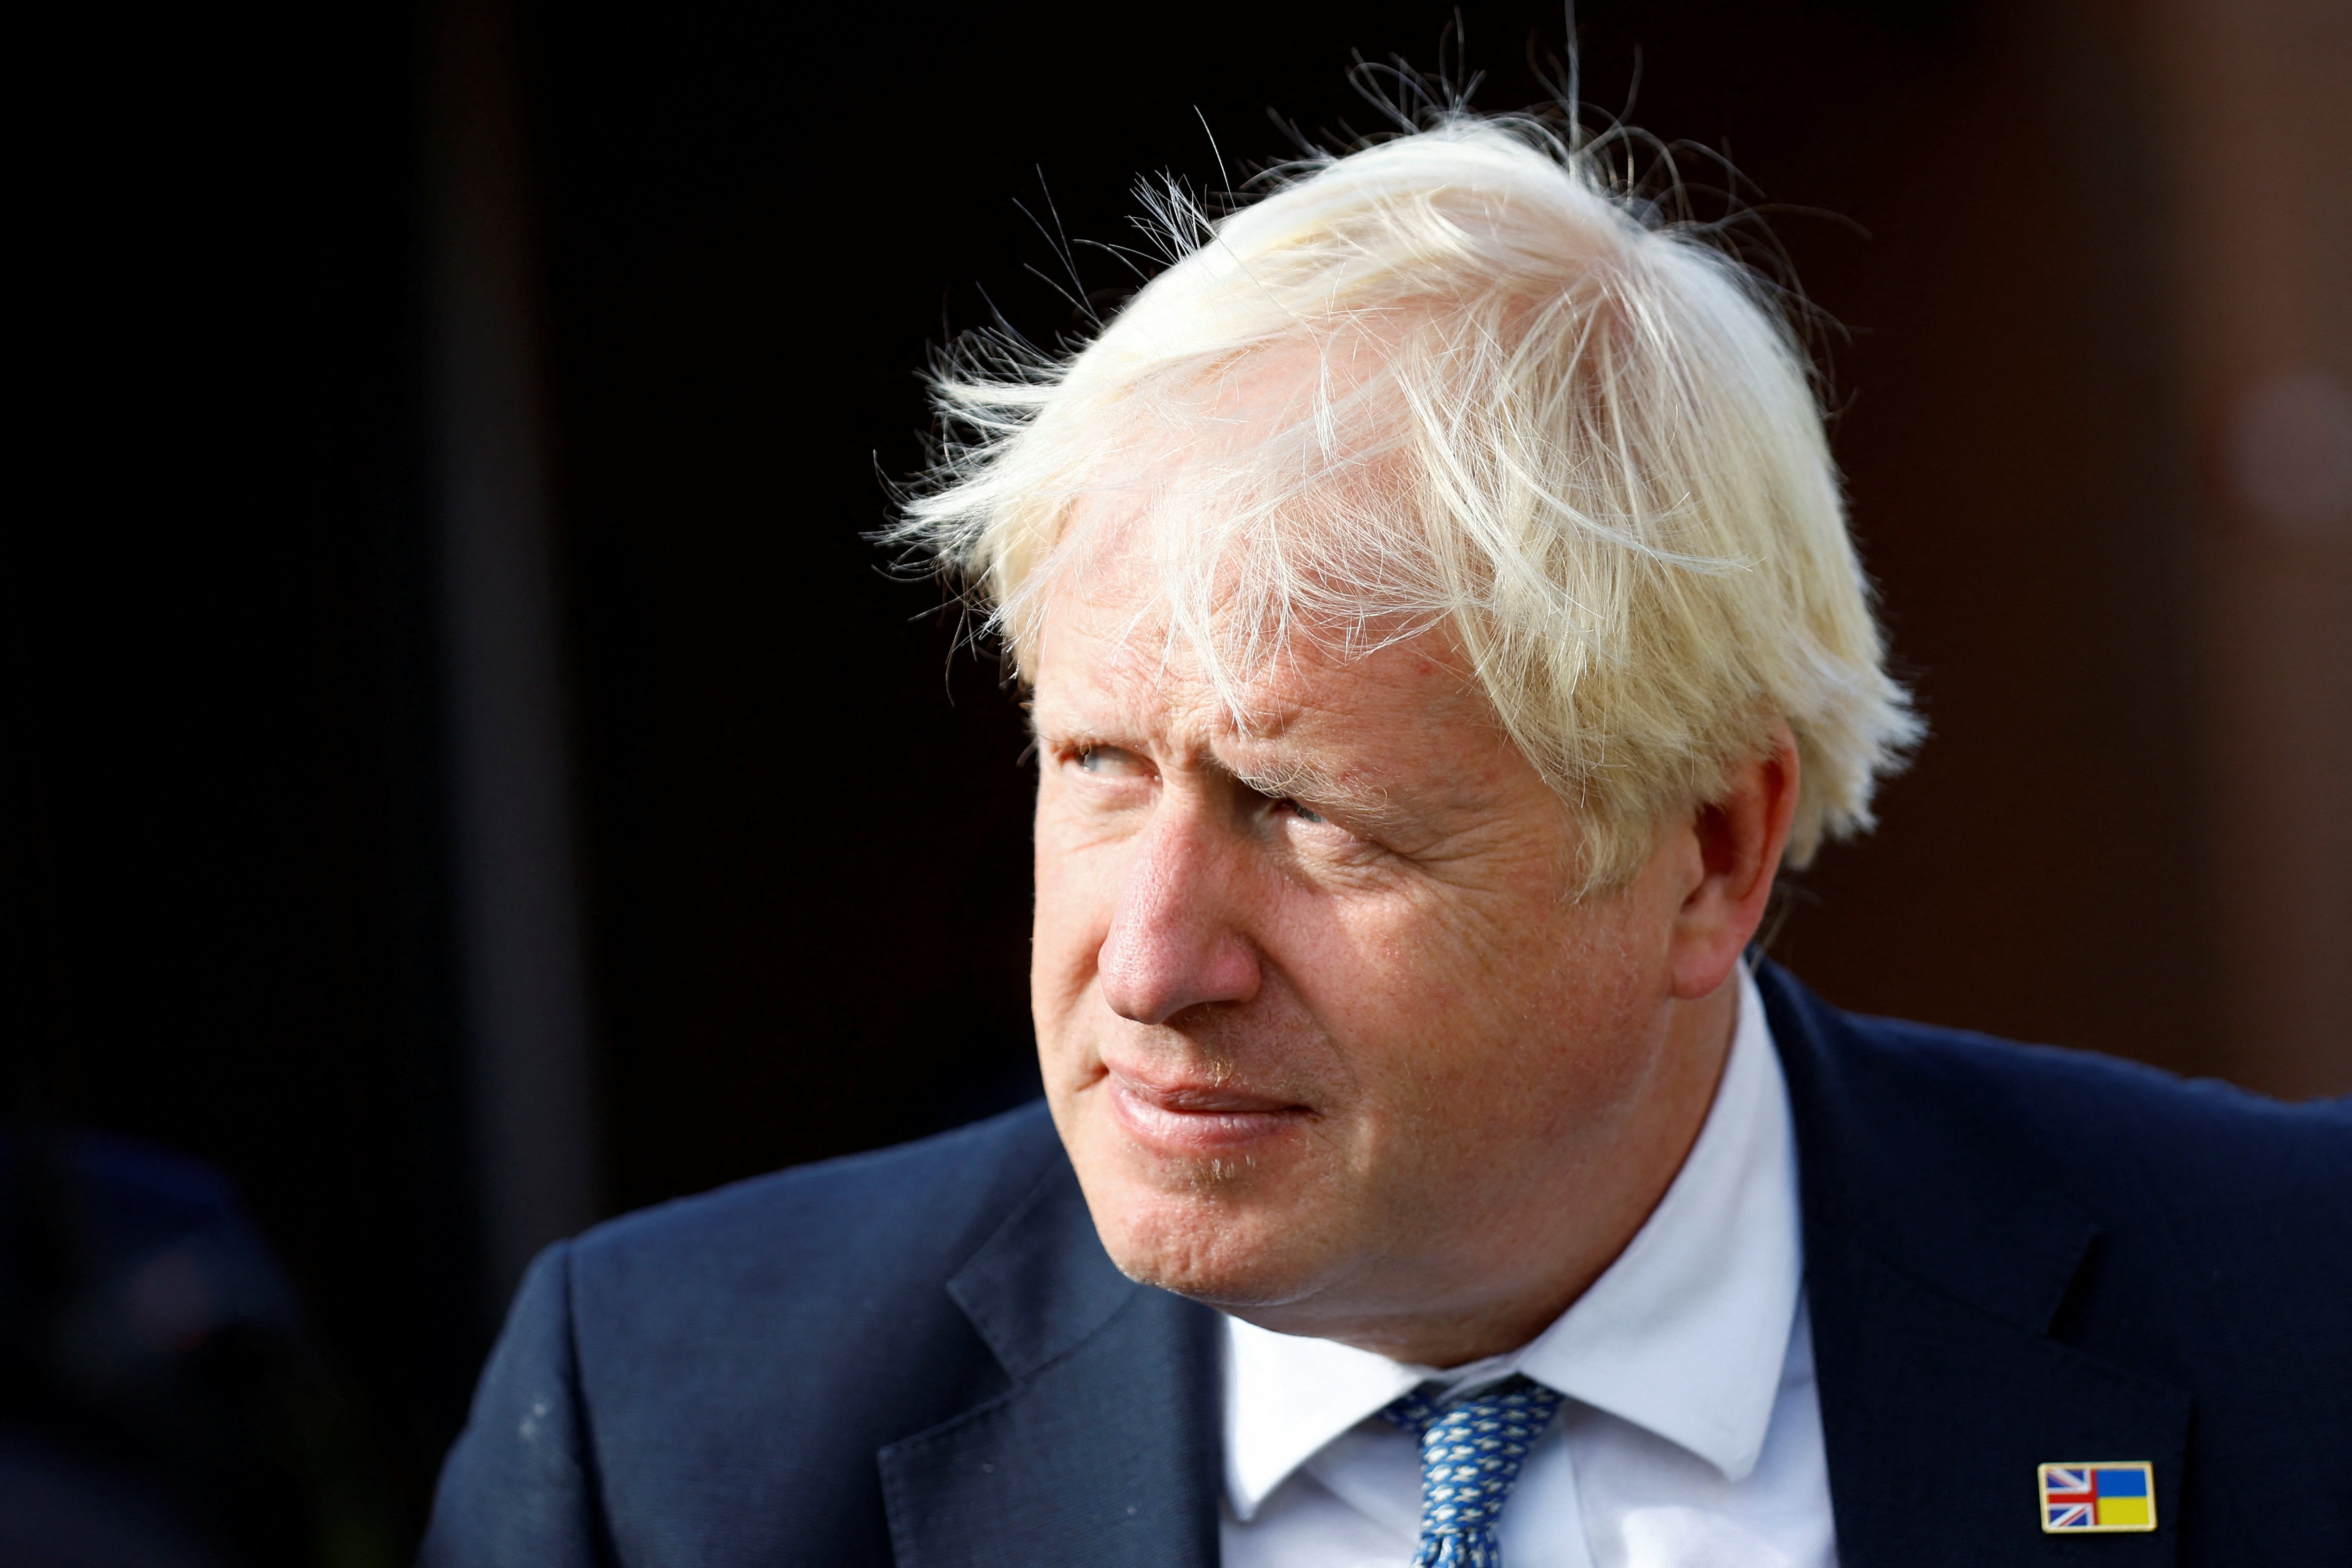 Boris Johnson will leave office in a matter of days